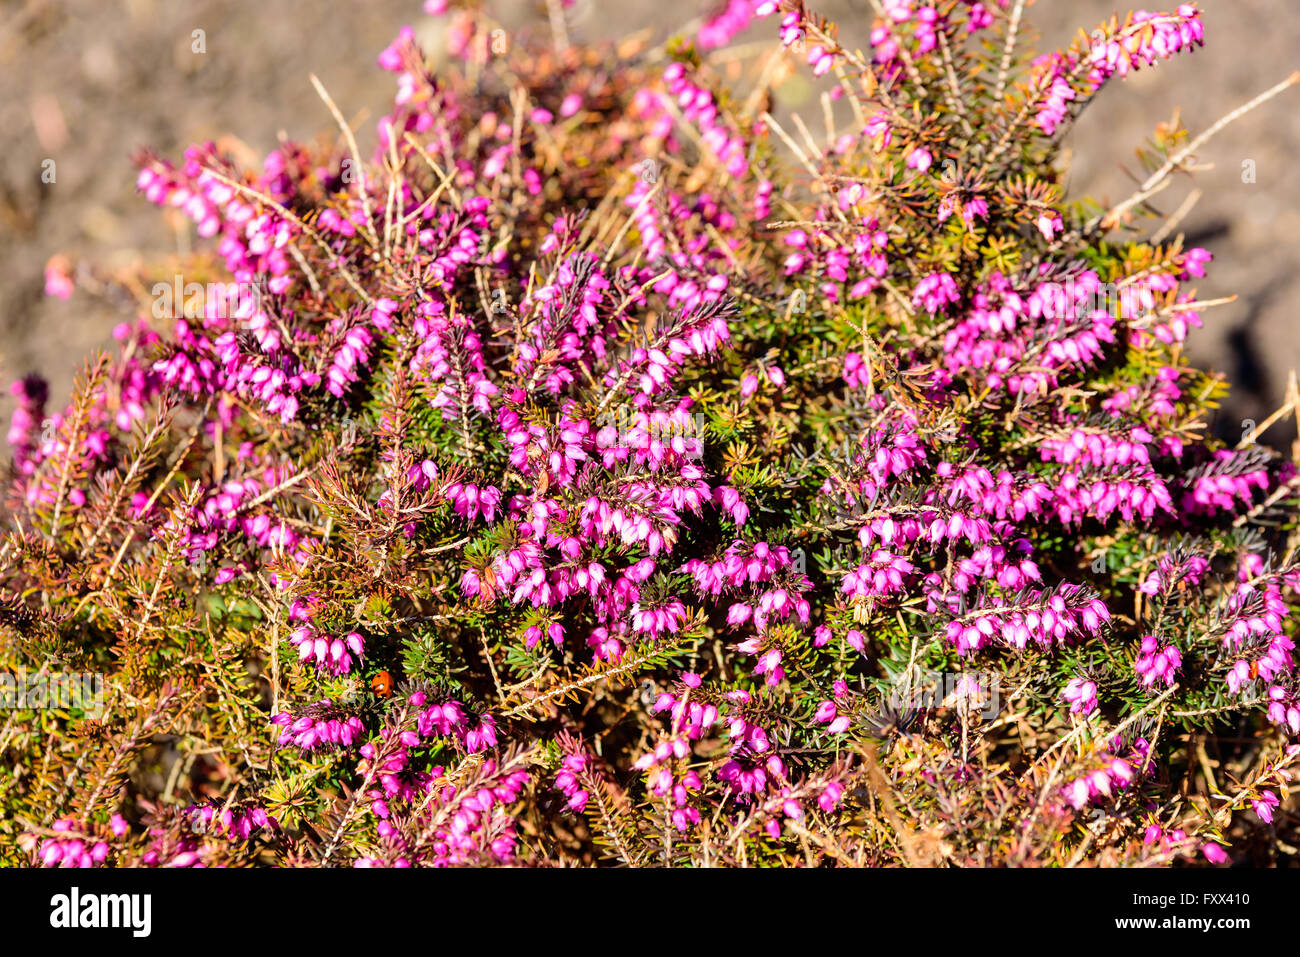 Erica darleyensis, a variety of heather or heath, here seen with a multitude of purple pink flowers in spring. Stock Photo